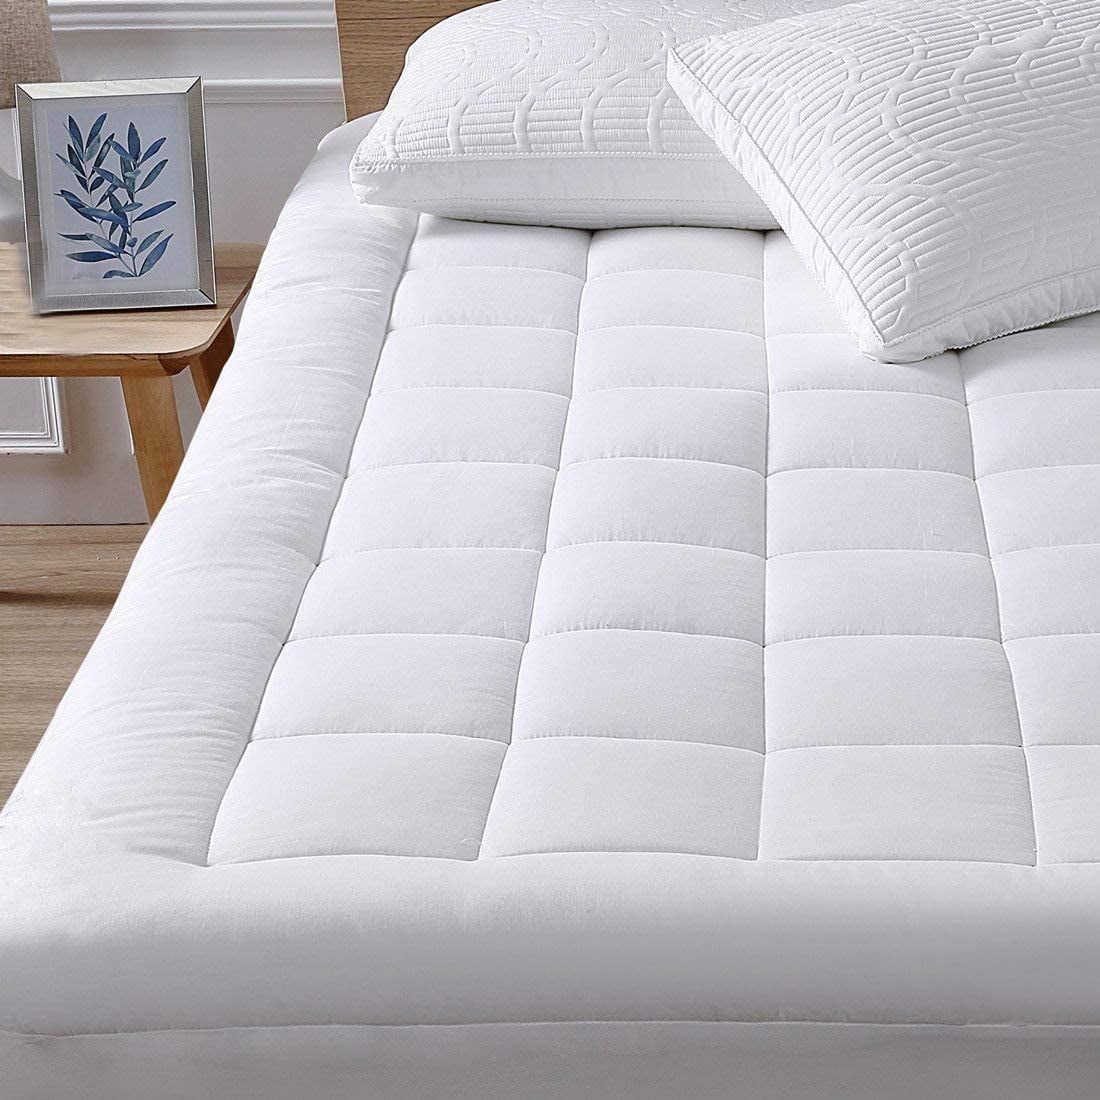 Details about   Cooling Mattress Pillowtop Cotton Bed Cover Deep Pocket Hypoallergenic Down Fill 